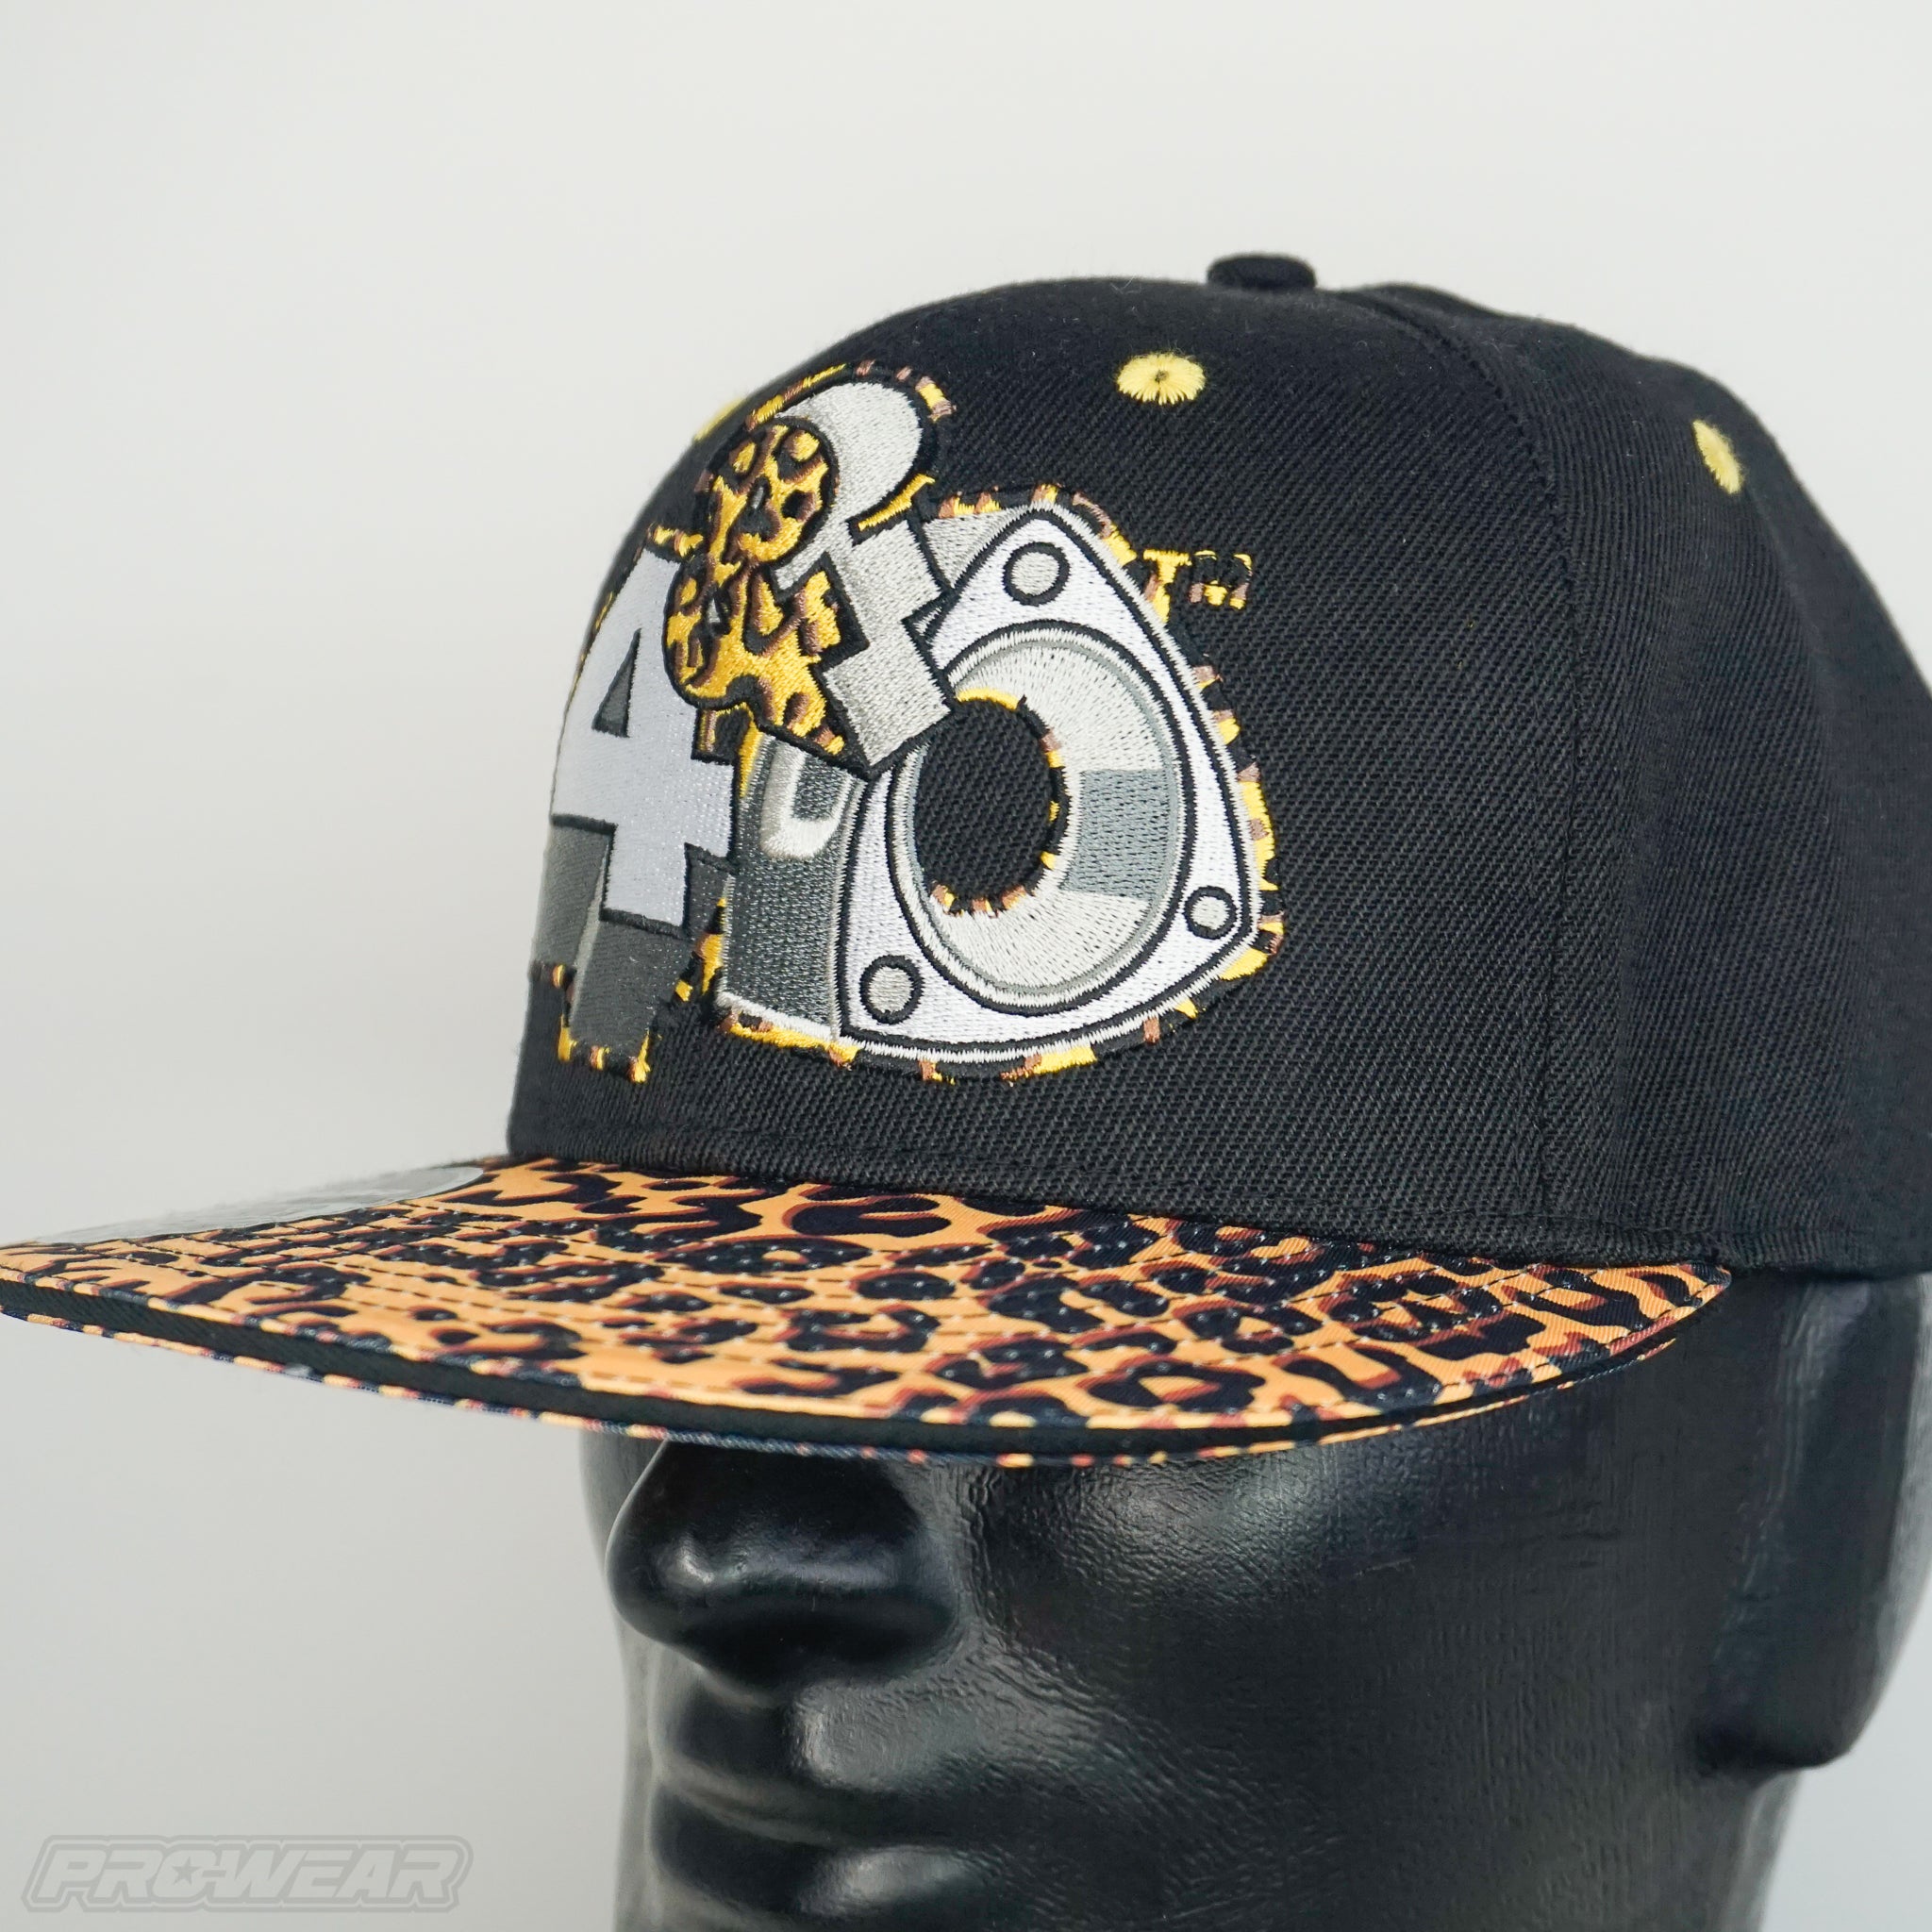 4 & Rotary Leopard Hat